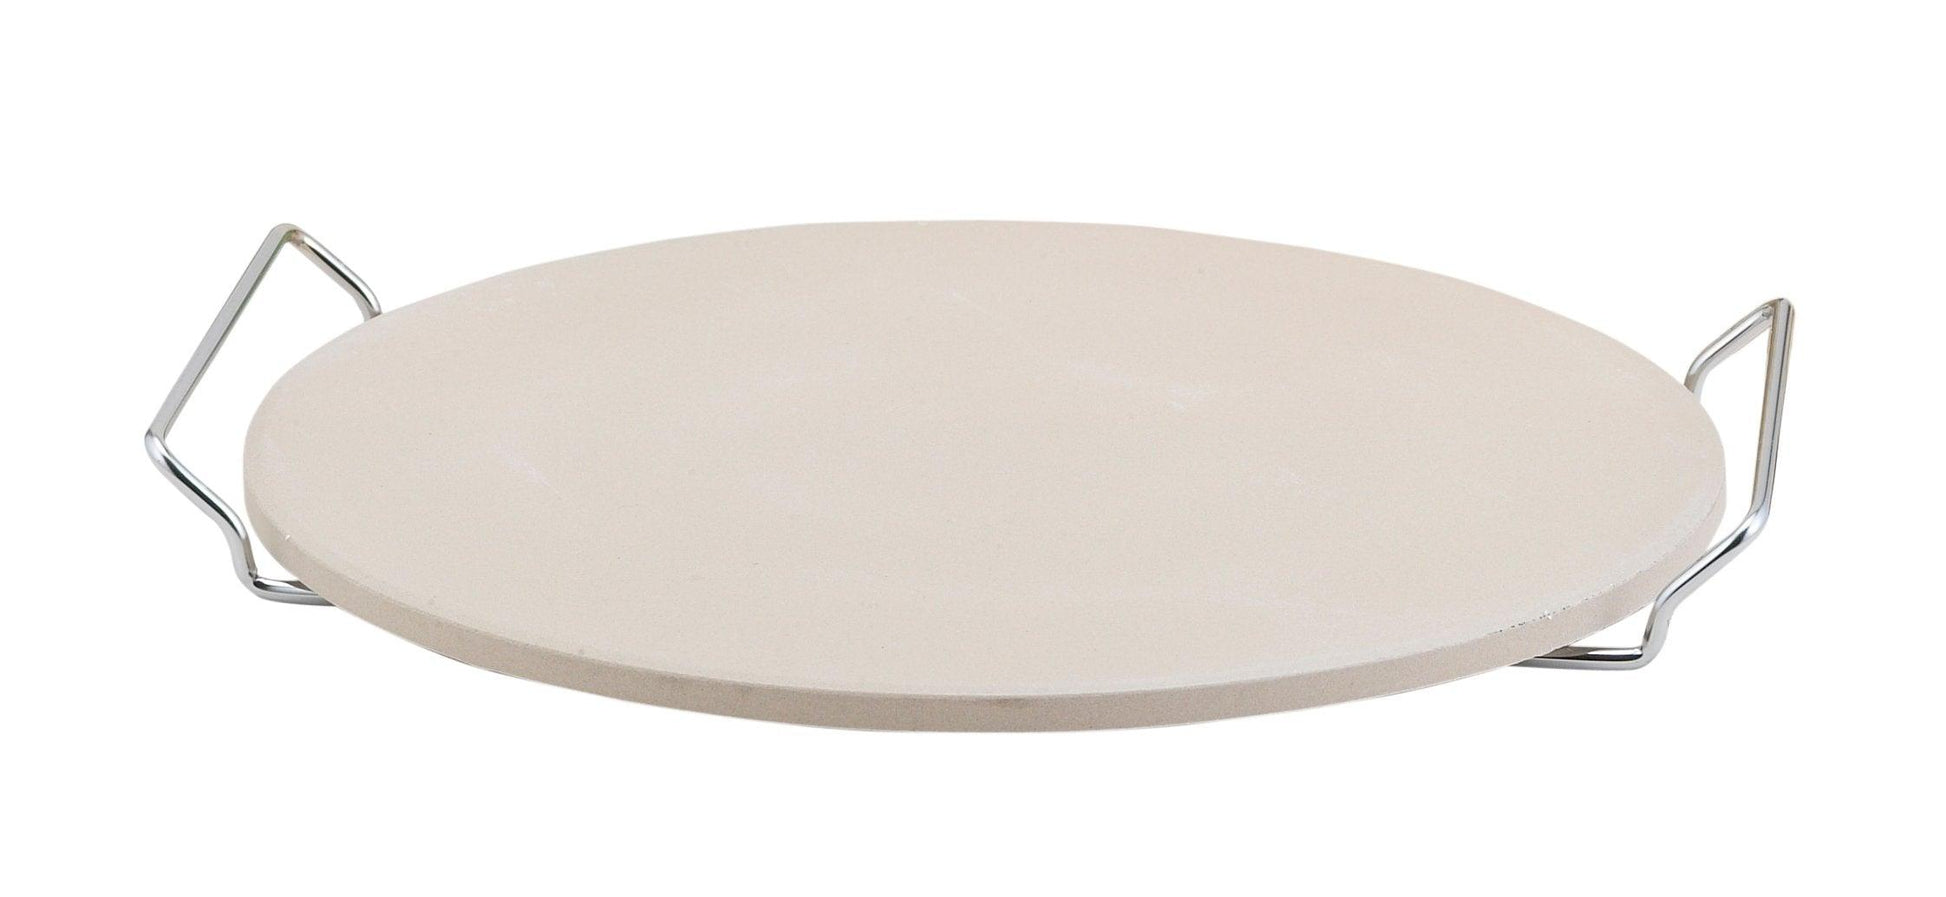 Fante's HIC Pizza Baking Stone with Serving Rack, Natural Ceramic Stoneware, 13" - CookCave